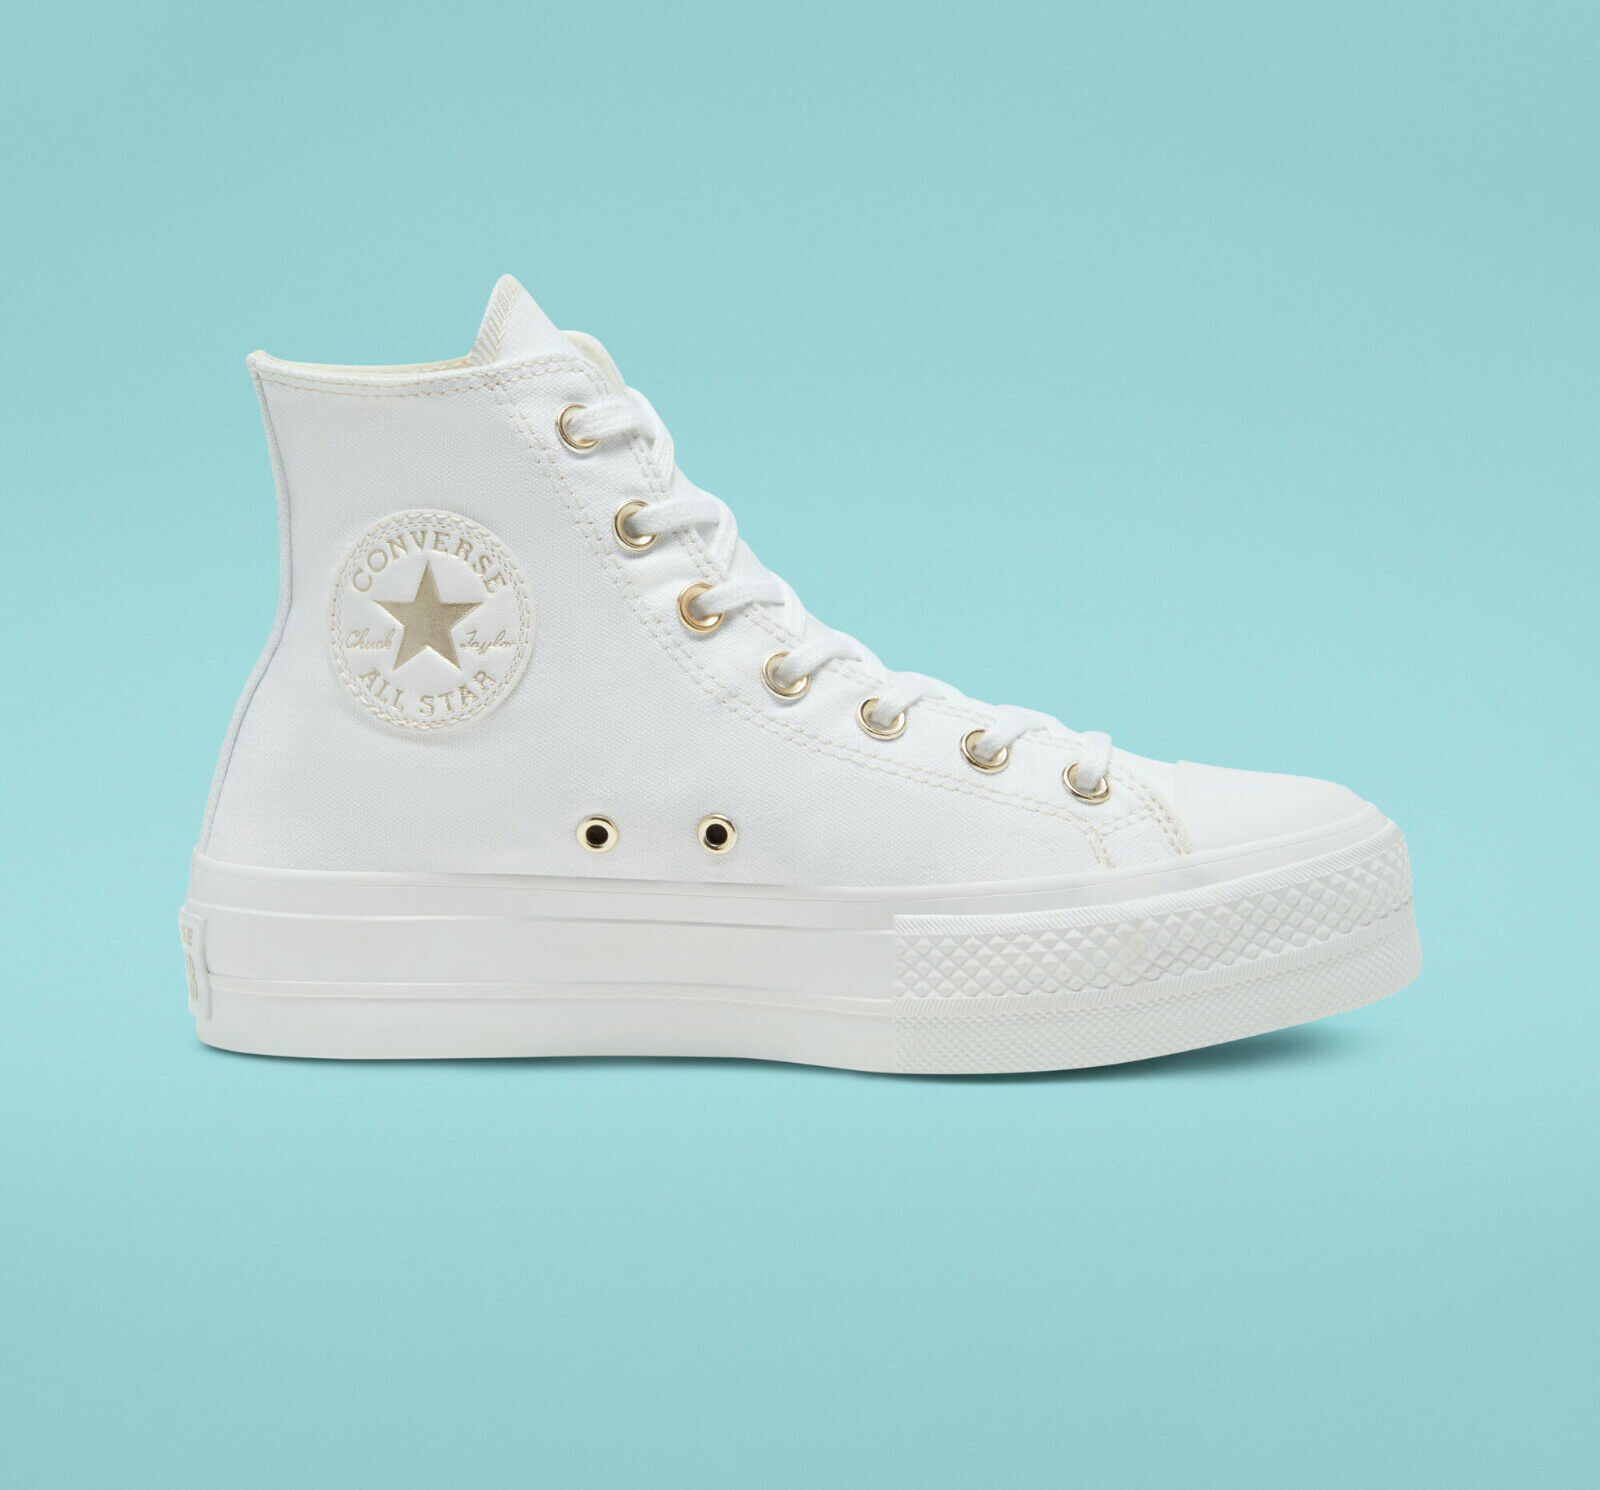 Converse Womens Elevated Gold Platform Chuck Taylor All Star Canvas Shoes White